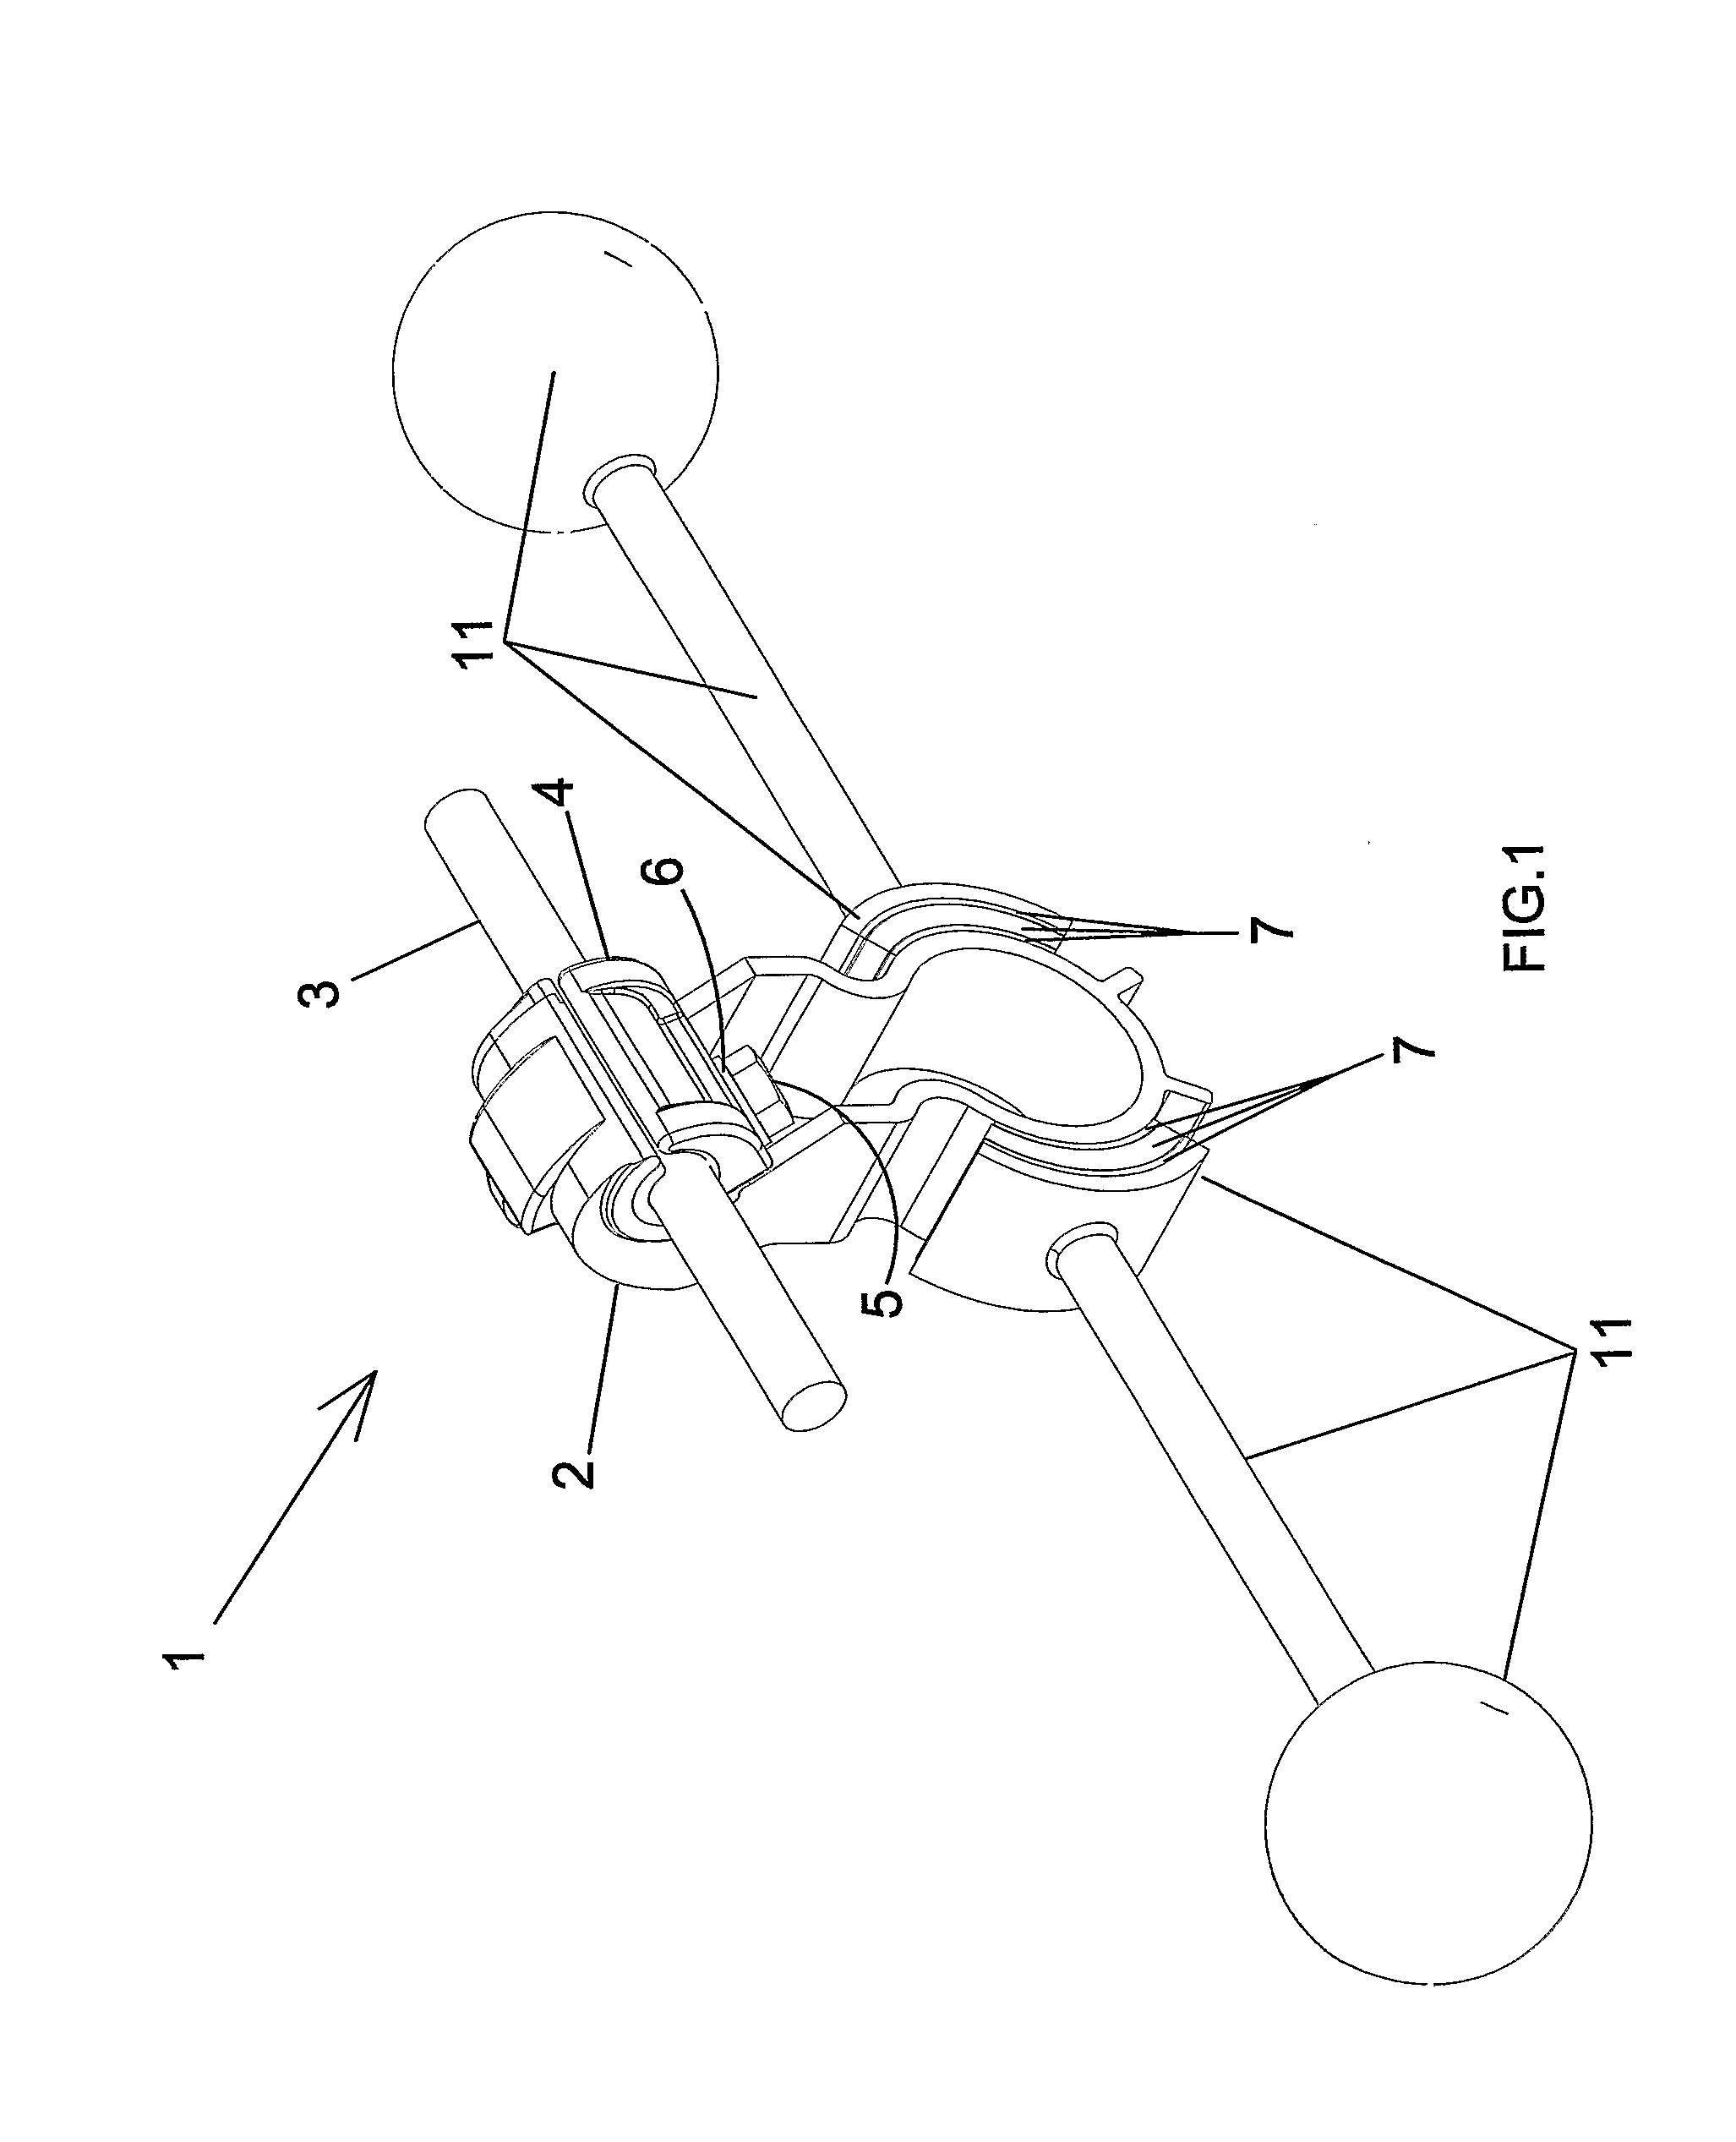 Device for dynamically neutralizing vibrations in single cable overhead power transmission lines